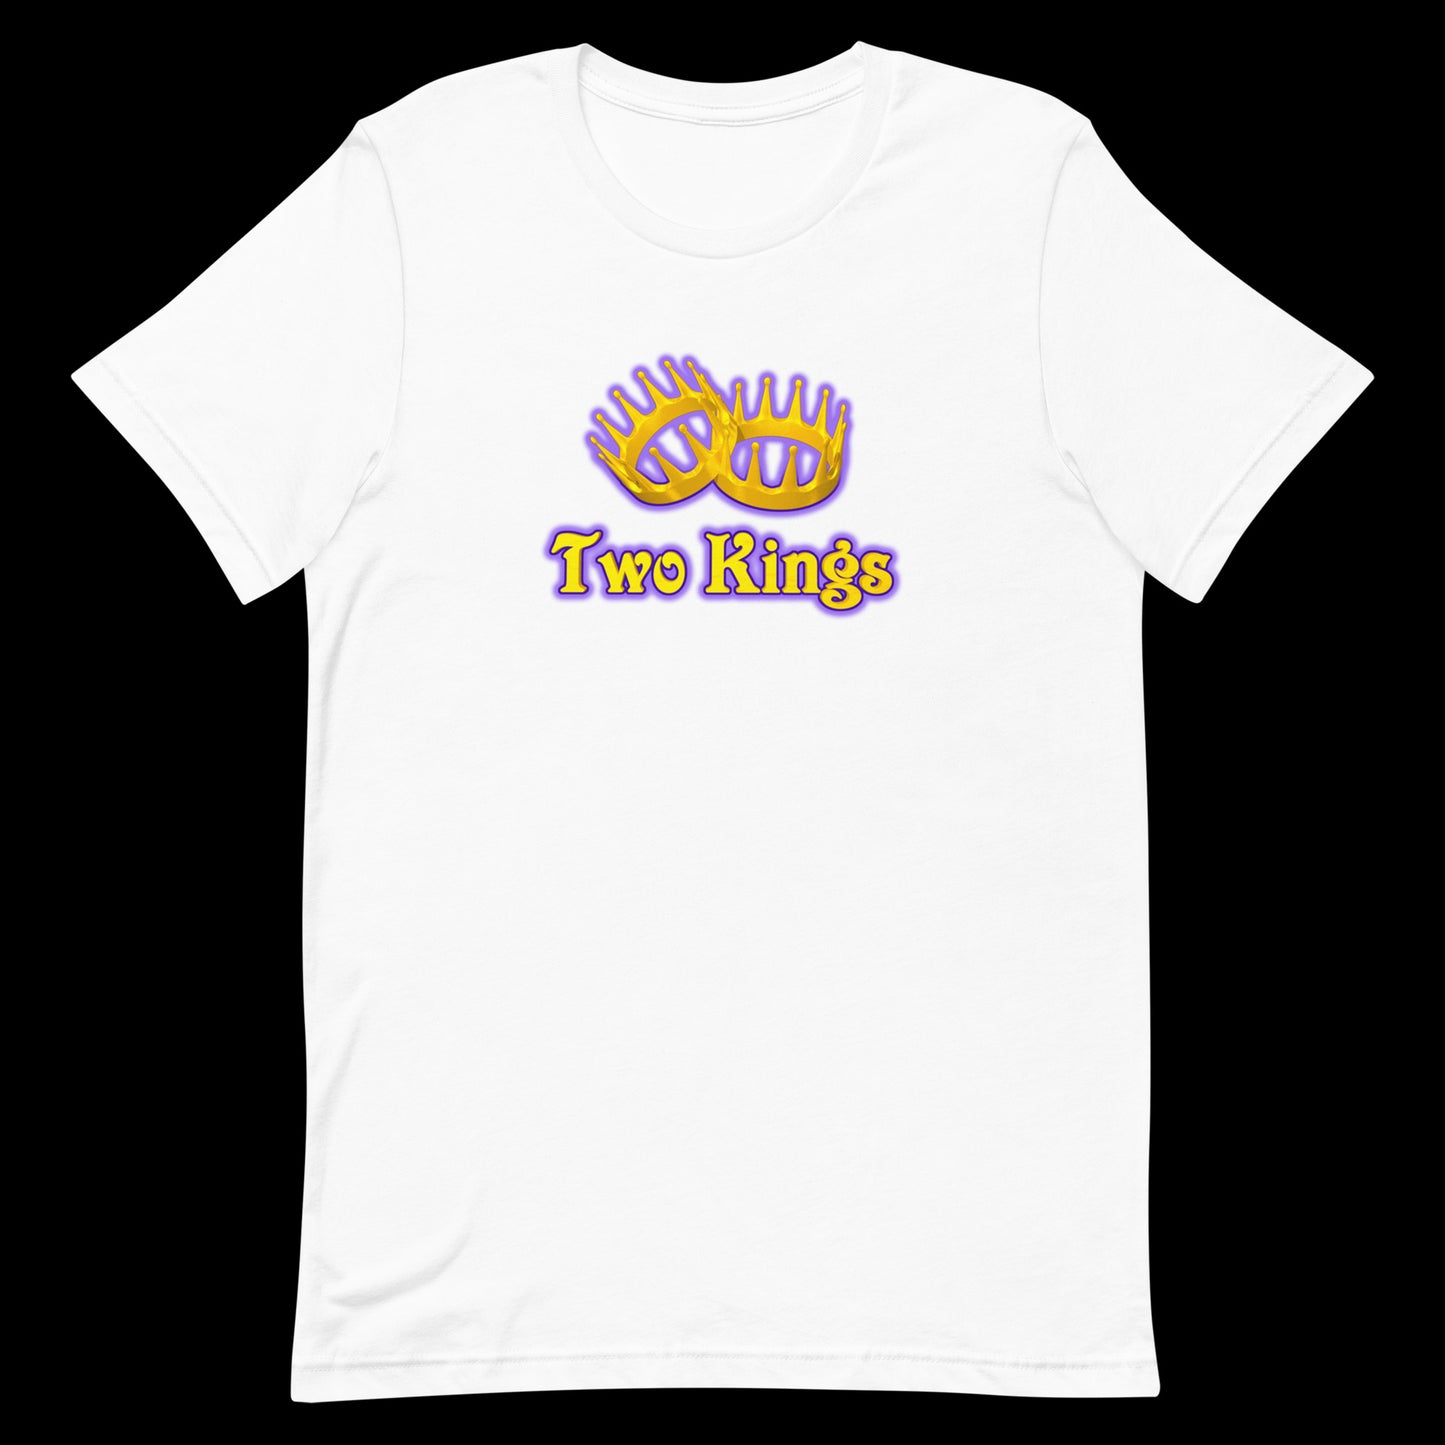 Two Kings Color T-Shirt (Black Lettering)